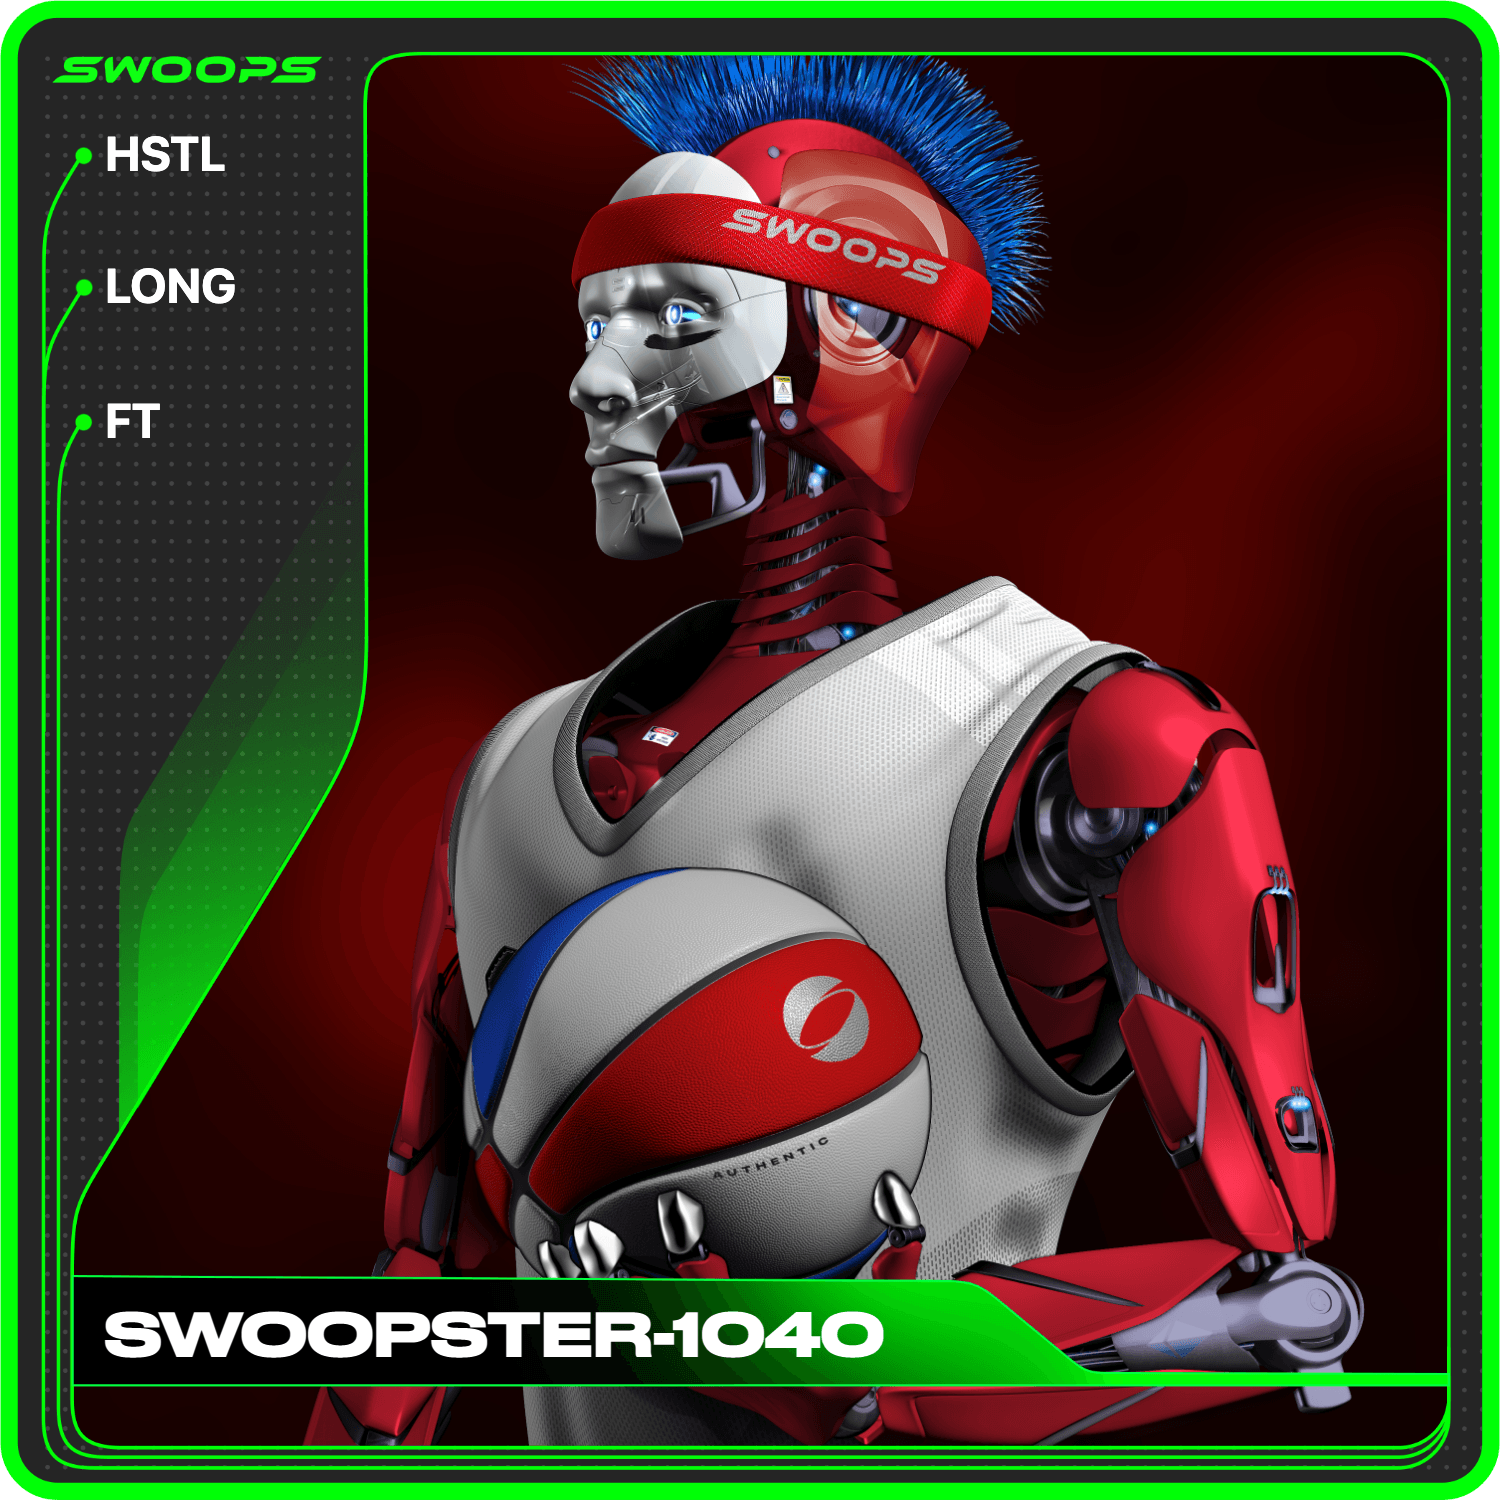 SWOOPSTER-1040